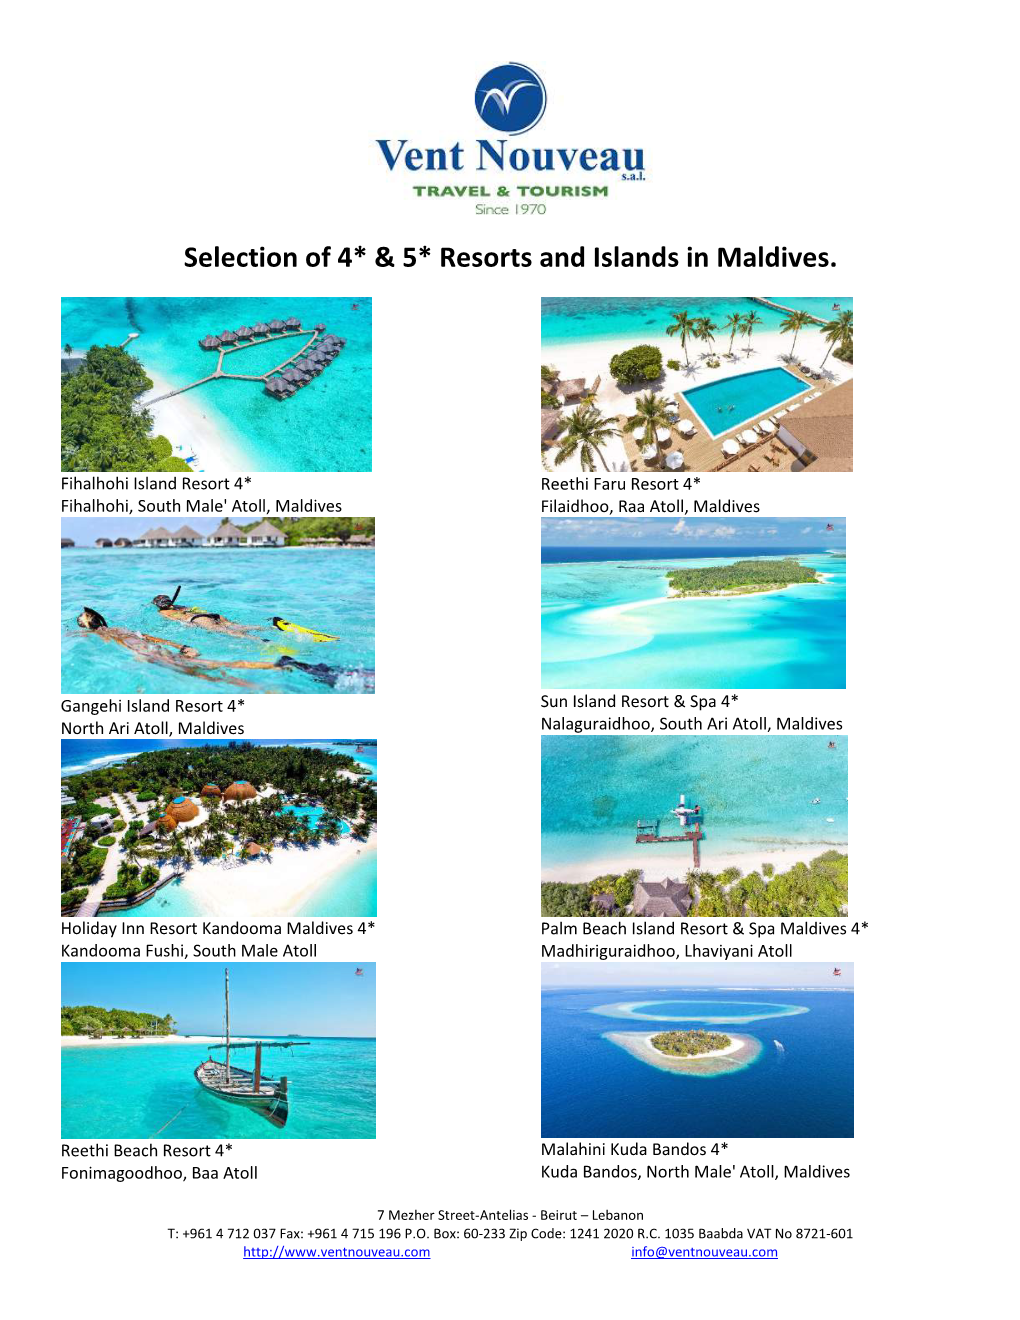 Selection of 4* & 5* Resorts and Islands in Maldives